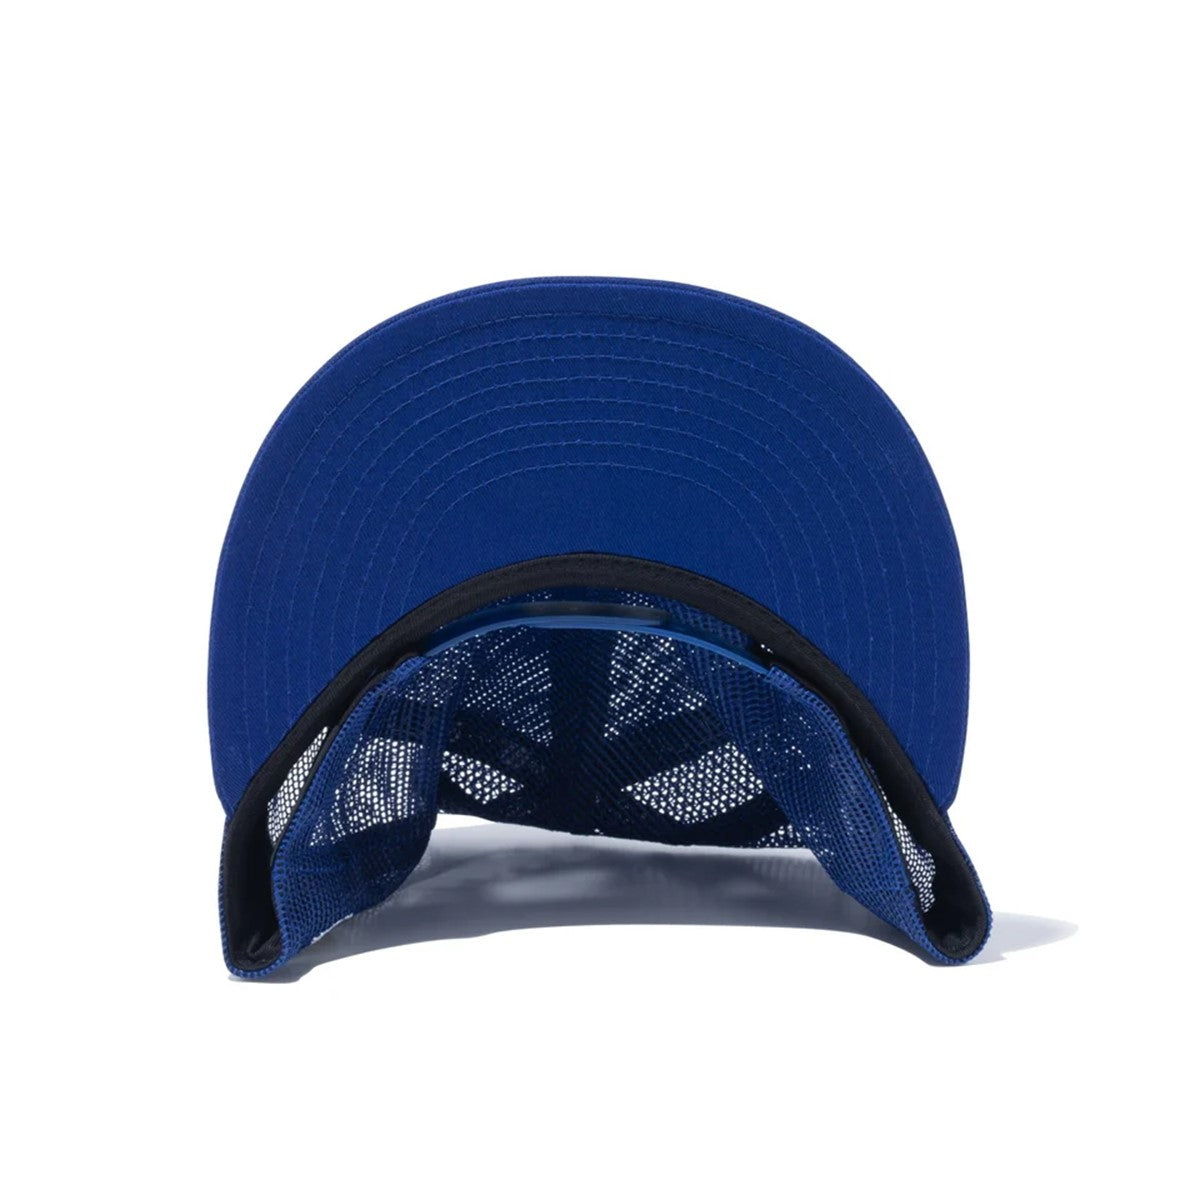 NEW ERA Los Angeles Dodgers - 9FIFTY ALL MESH SP DROY【14109653】